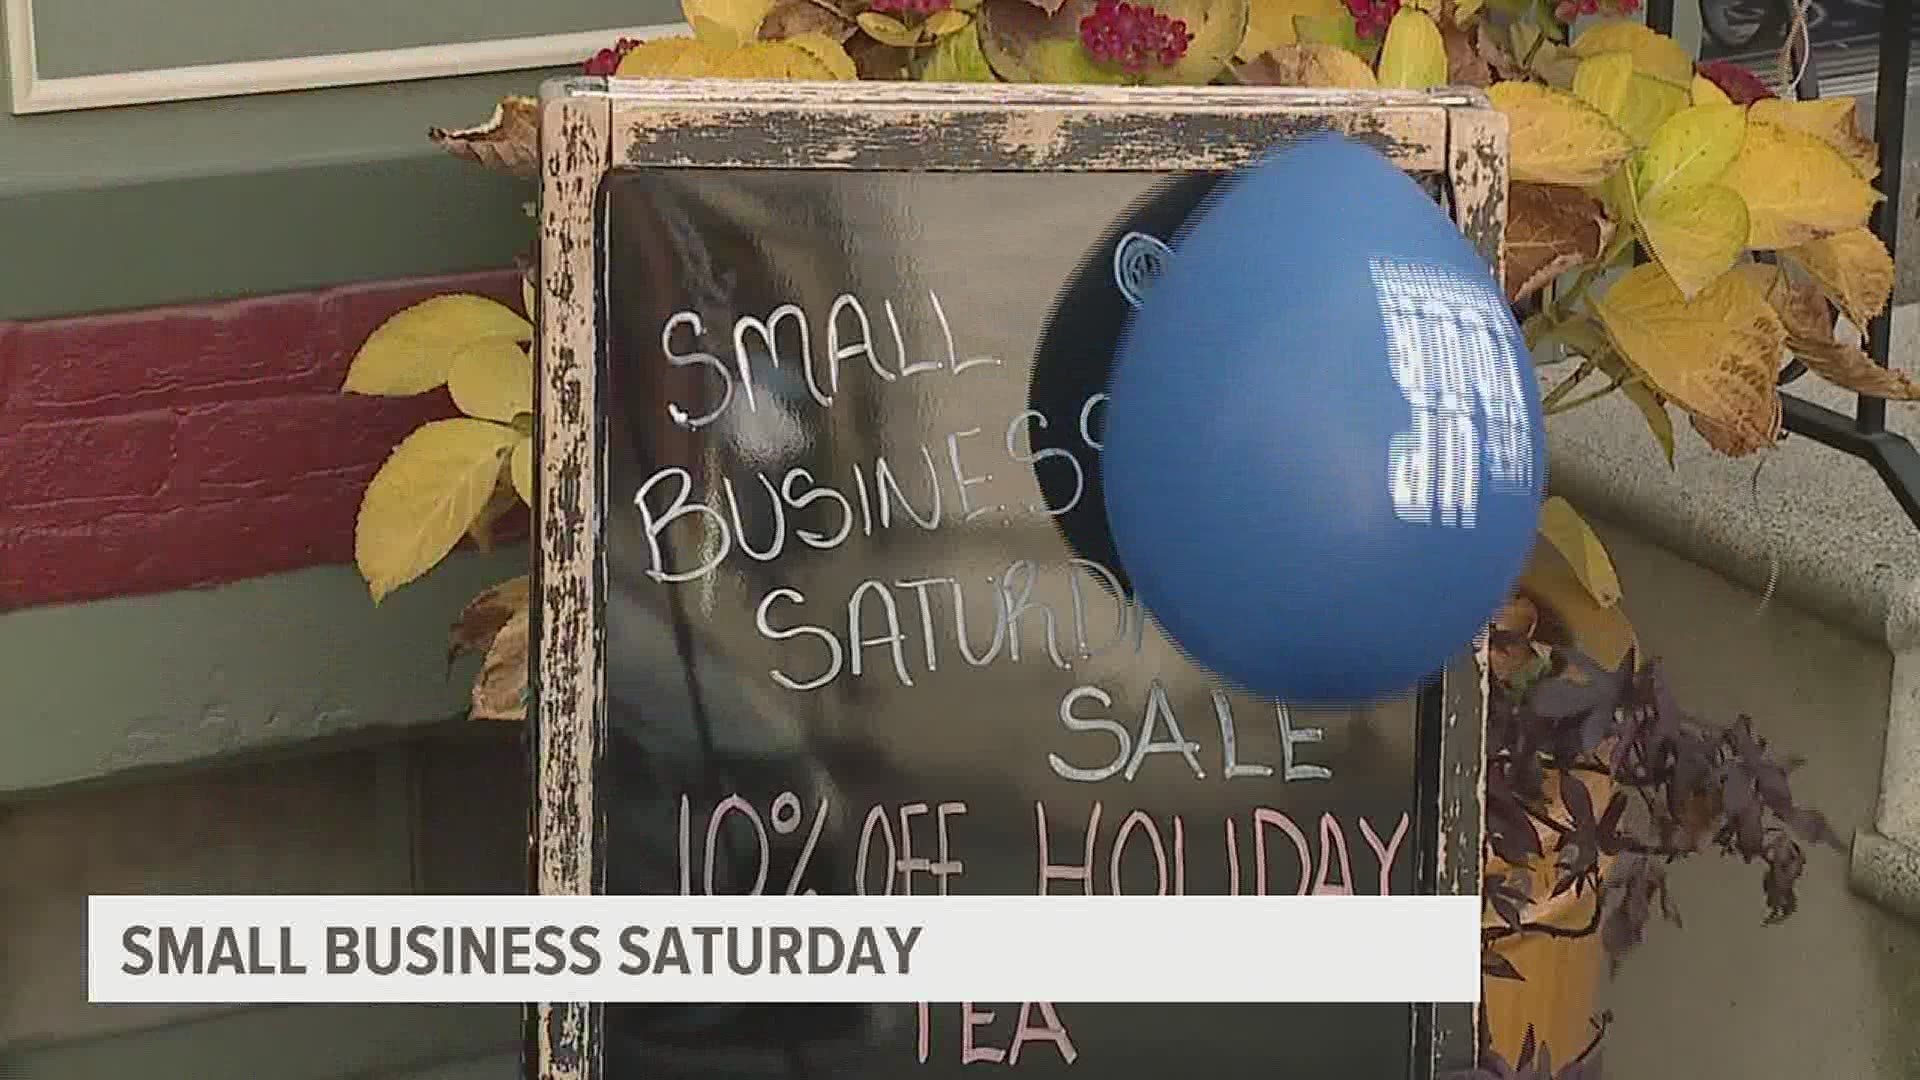 Small Business Saturday brings in billions of dollars to small businesses each year, and this year that help is needed more than ever